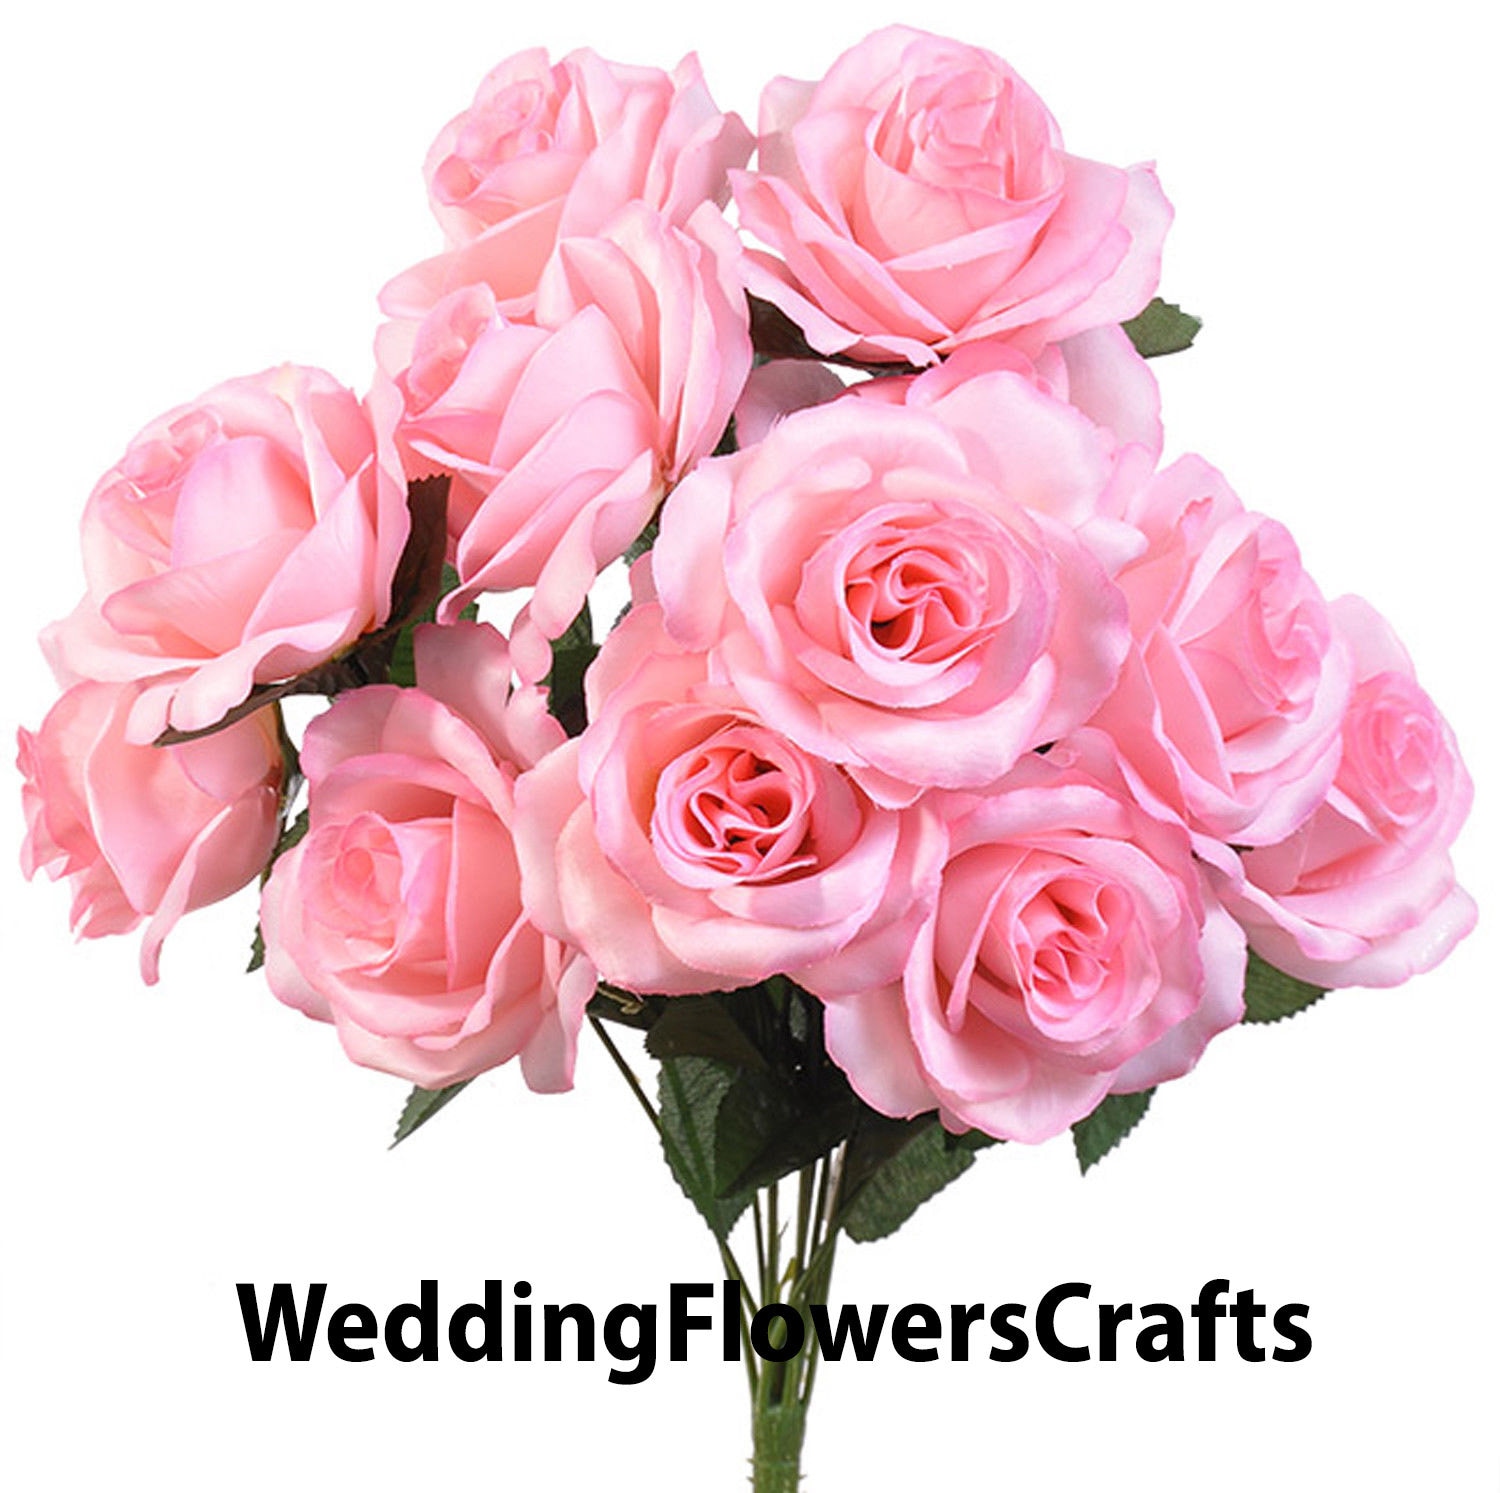 12 Artificial 4" Open Roses Silk Flowers Fake Faux Wedding Bouquets Centerpieces 